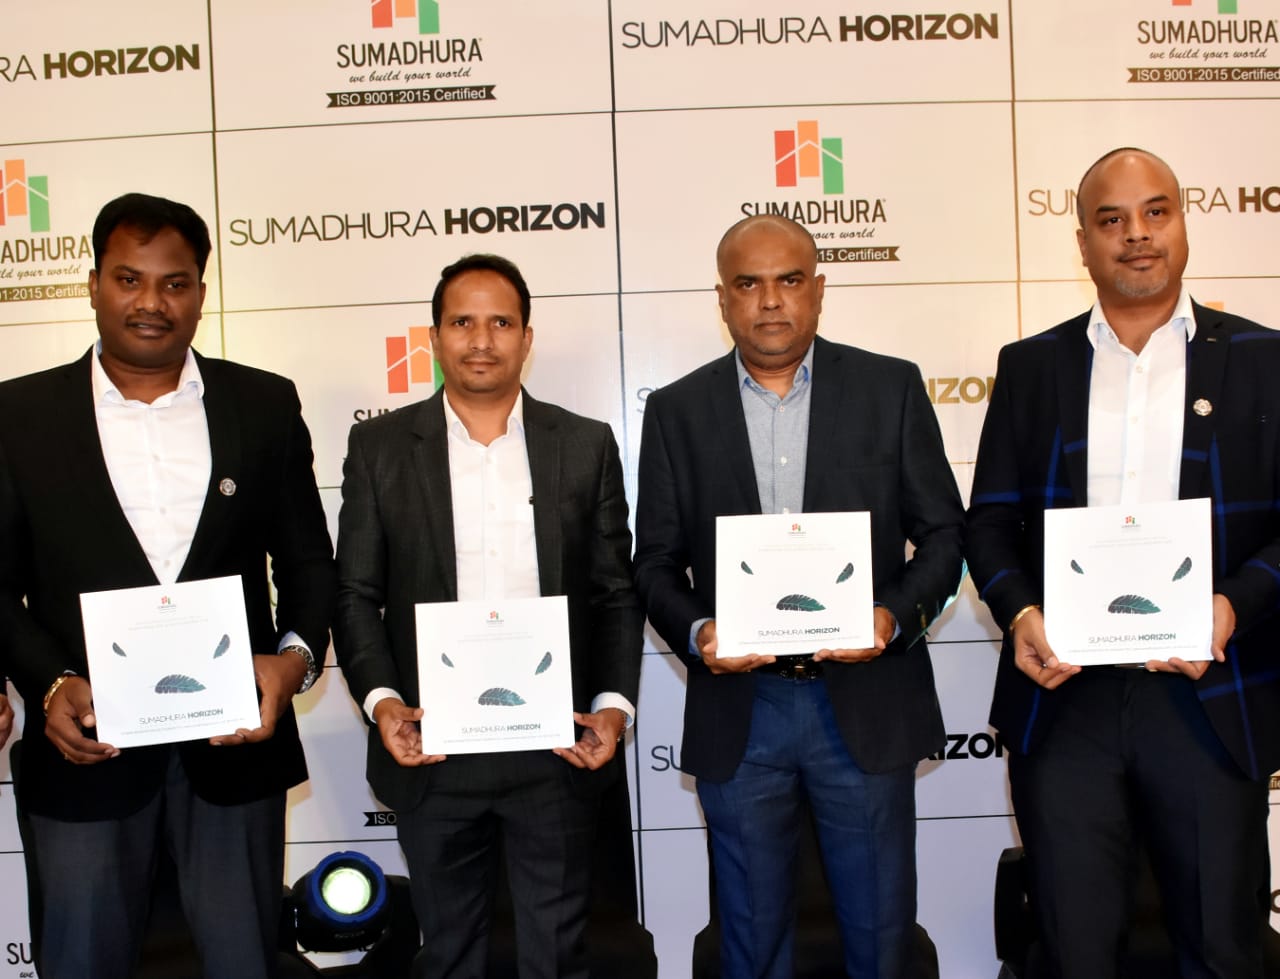 (Left to Right) Naveen G, Director, Construction; Madhusudhan G, CMD, Rama Rao, VC, K Bharat, Director Operations at the launch of Sumadhura Horizon, a 300 crore super luxury residential project located at Kondapur, Hyderabad from Sumadhura Group. -Photo By Sachin Murdeshwar GPN